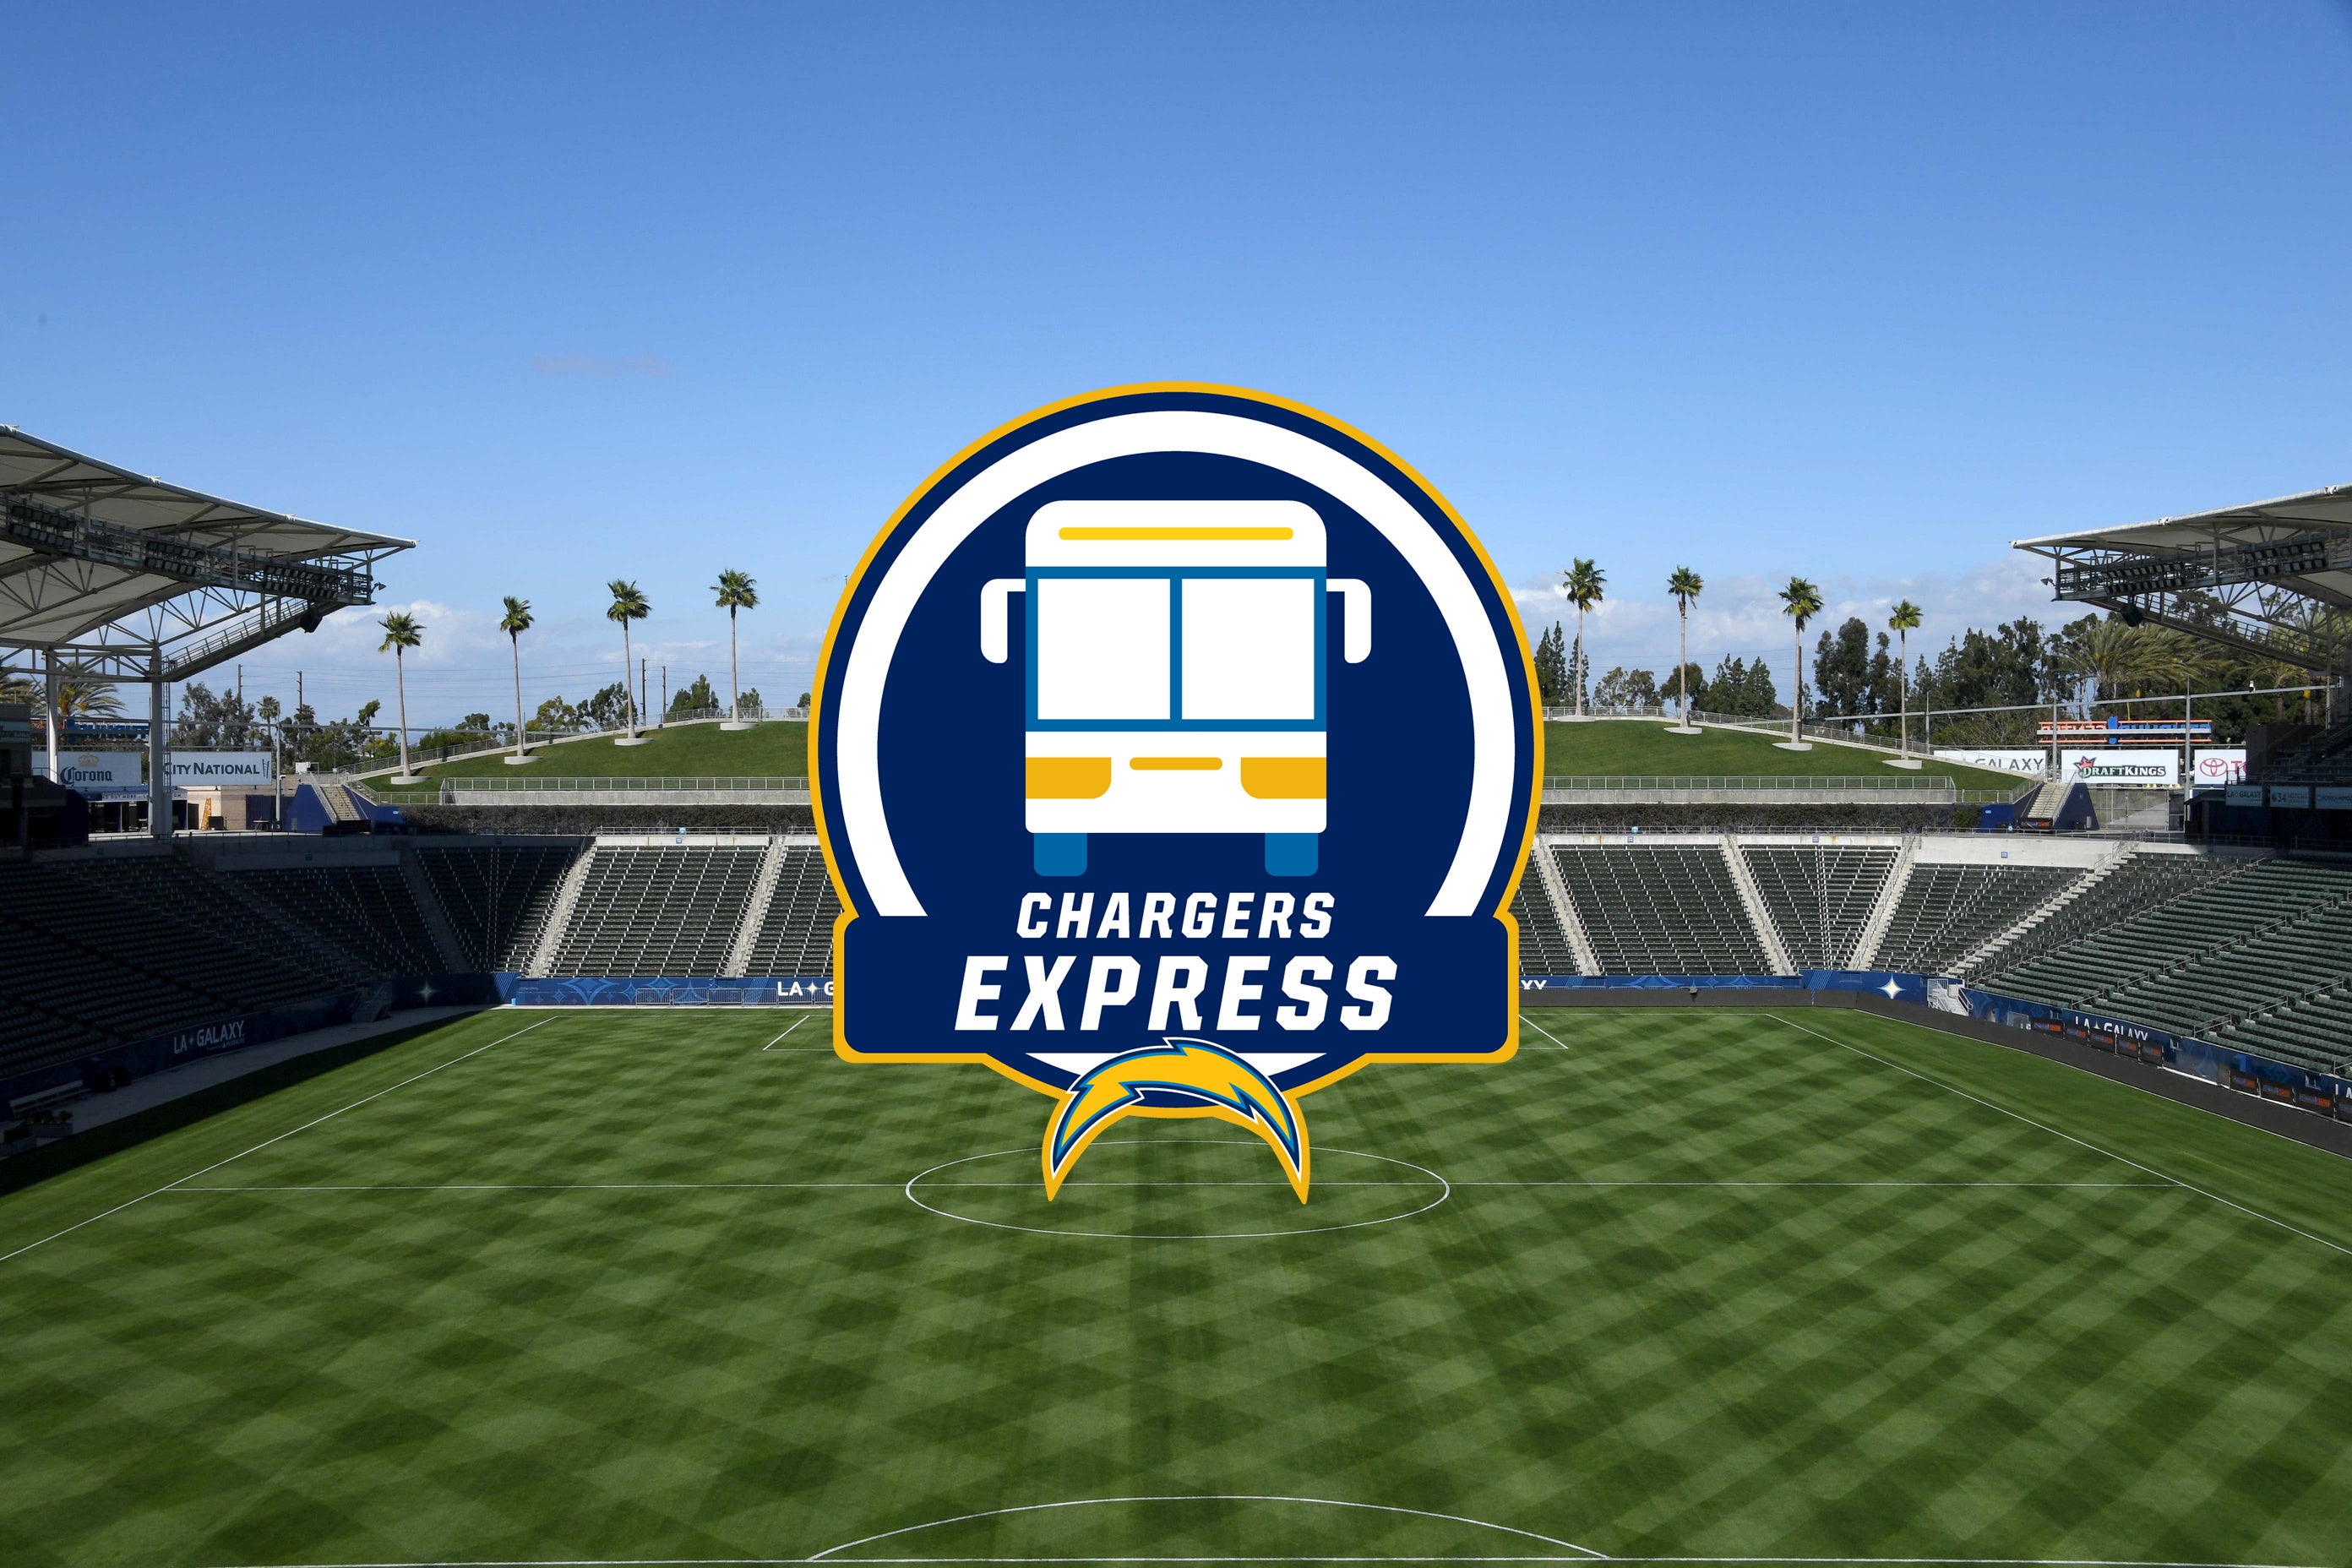 chargers express.jpg